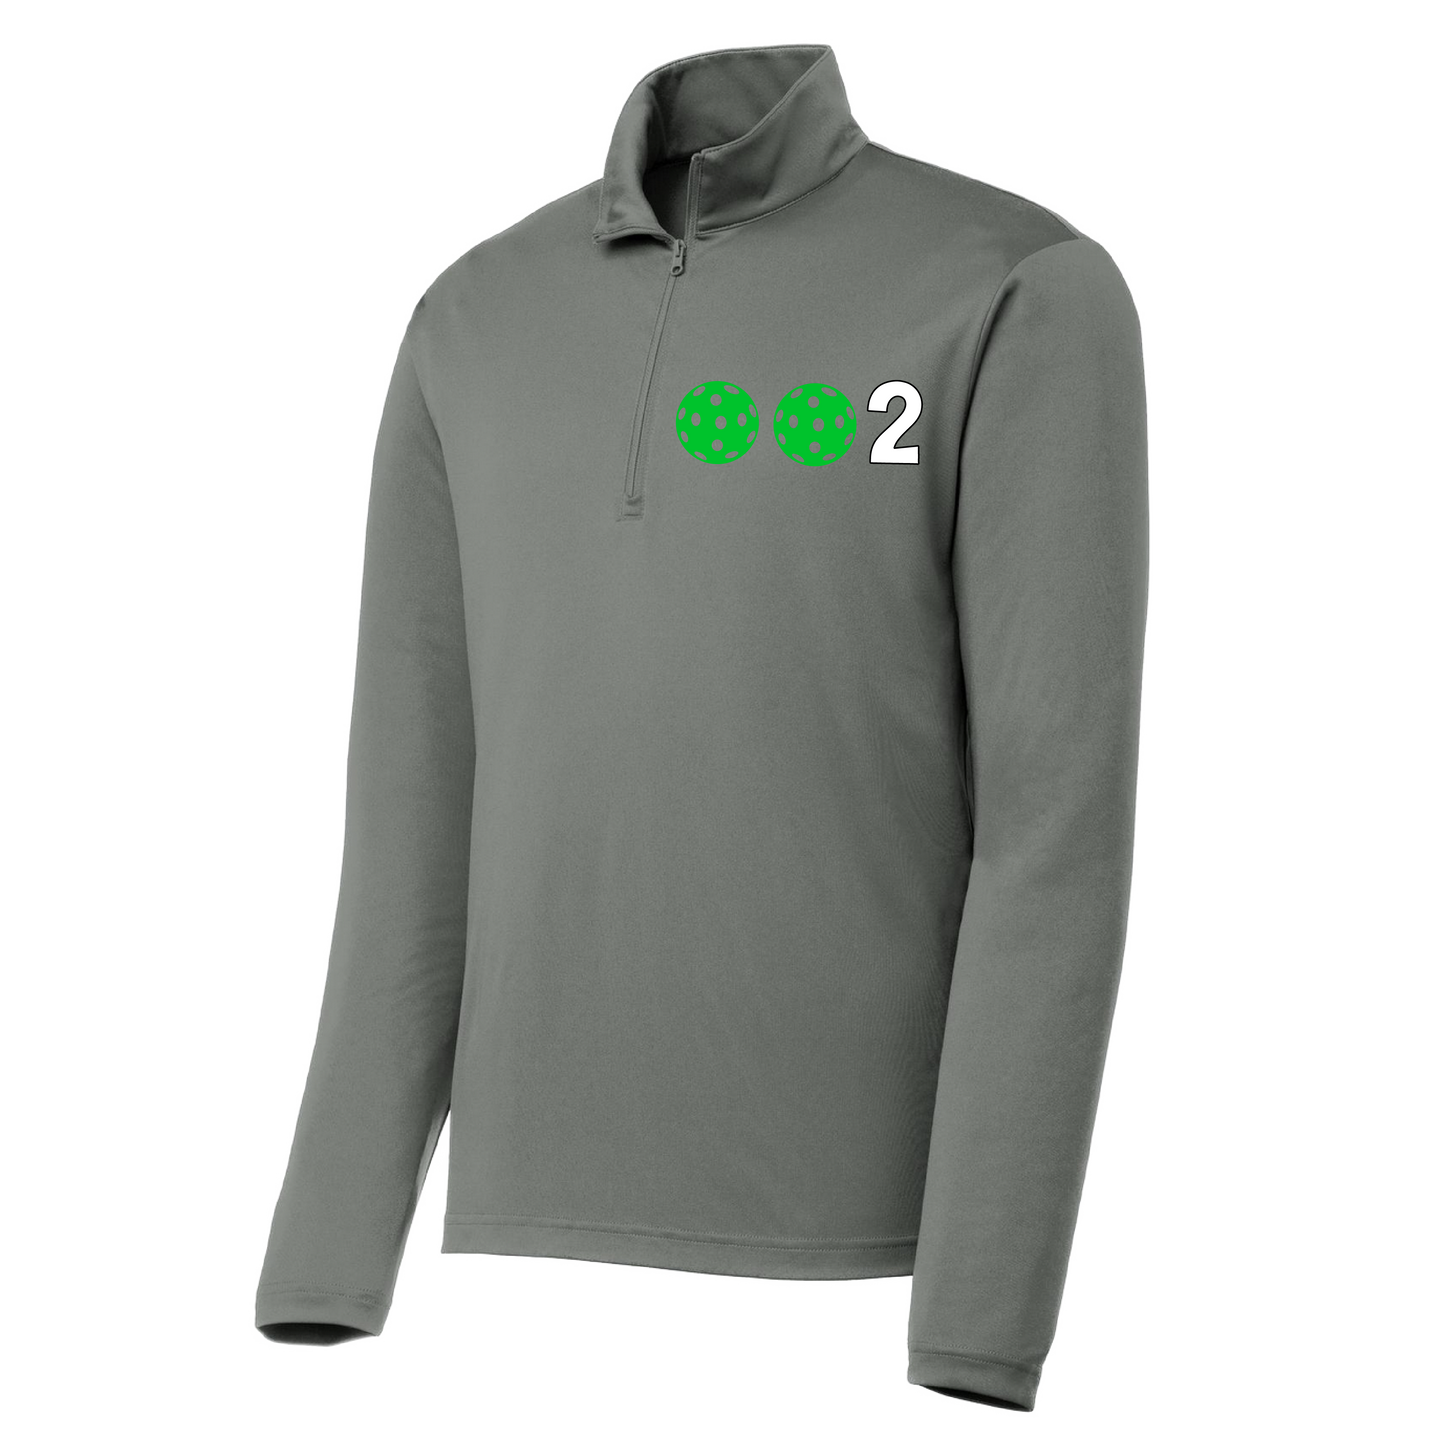 002 Pickleball (Colors Green Orange Red Or Stars) | Men's 1/4 Zip Long Sleeve Pullover Athletic Shirt | 100% Polyester